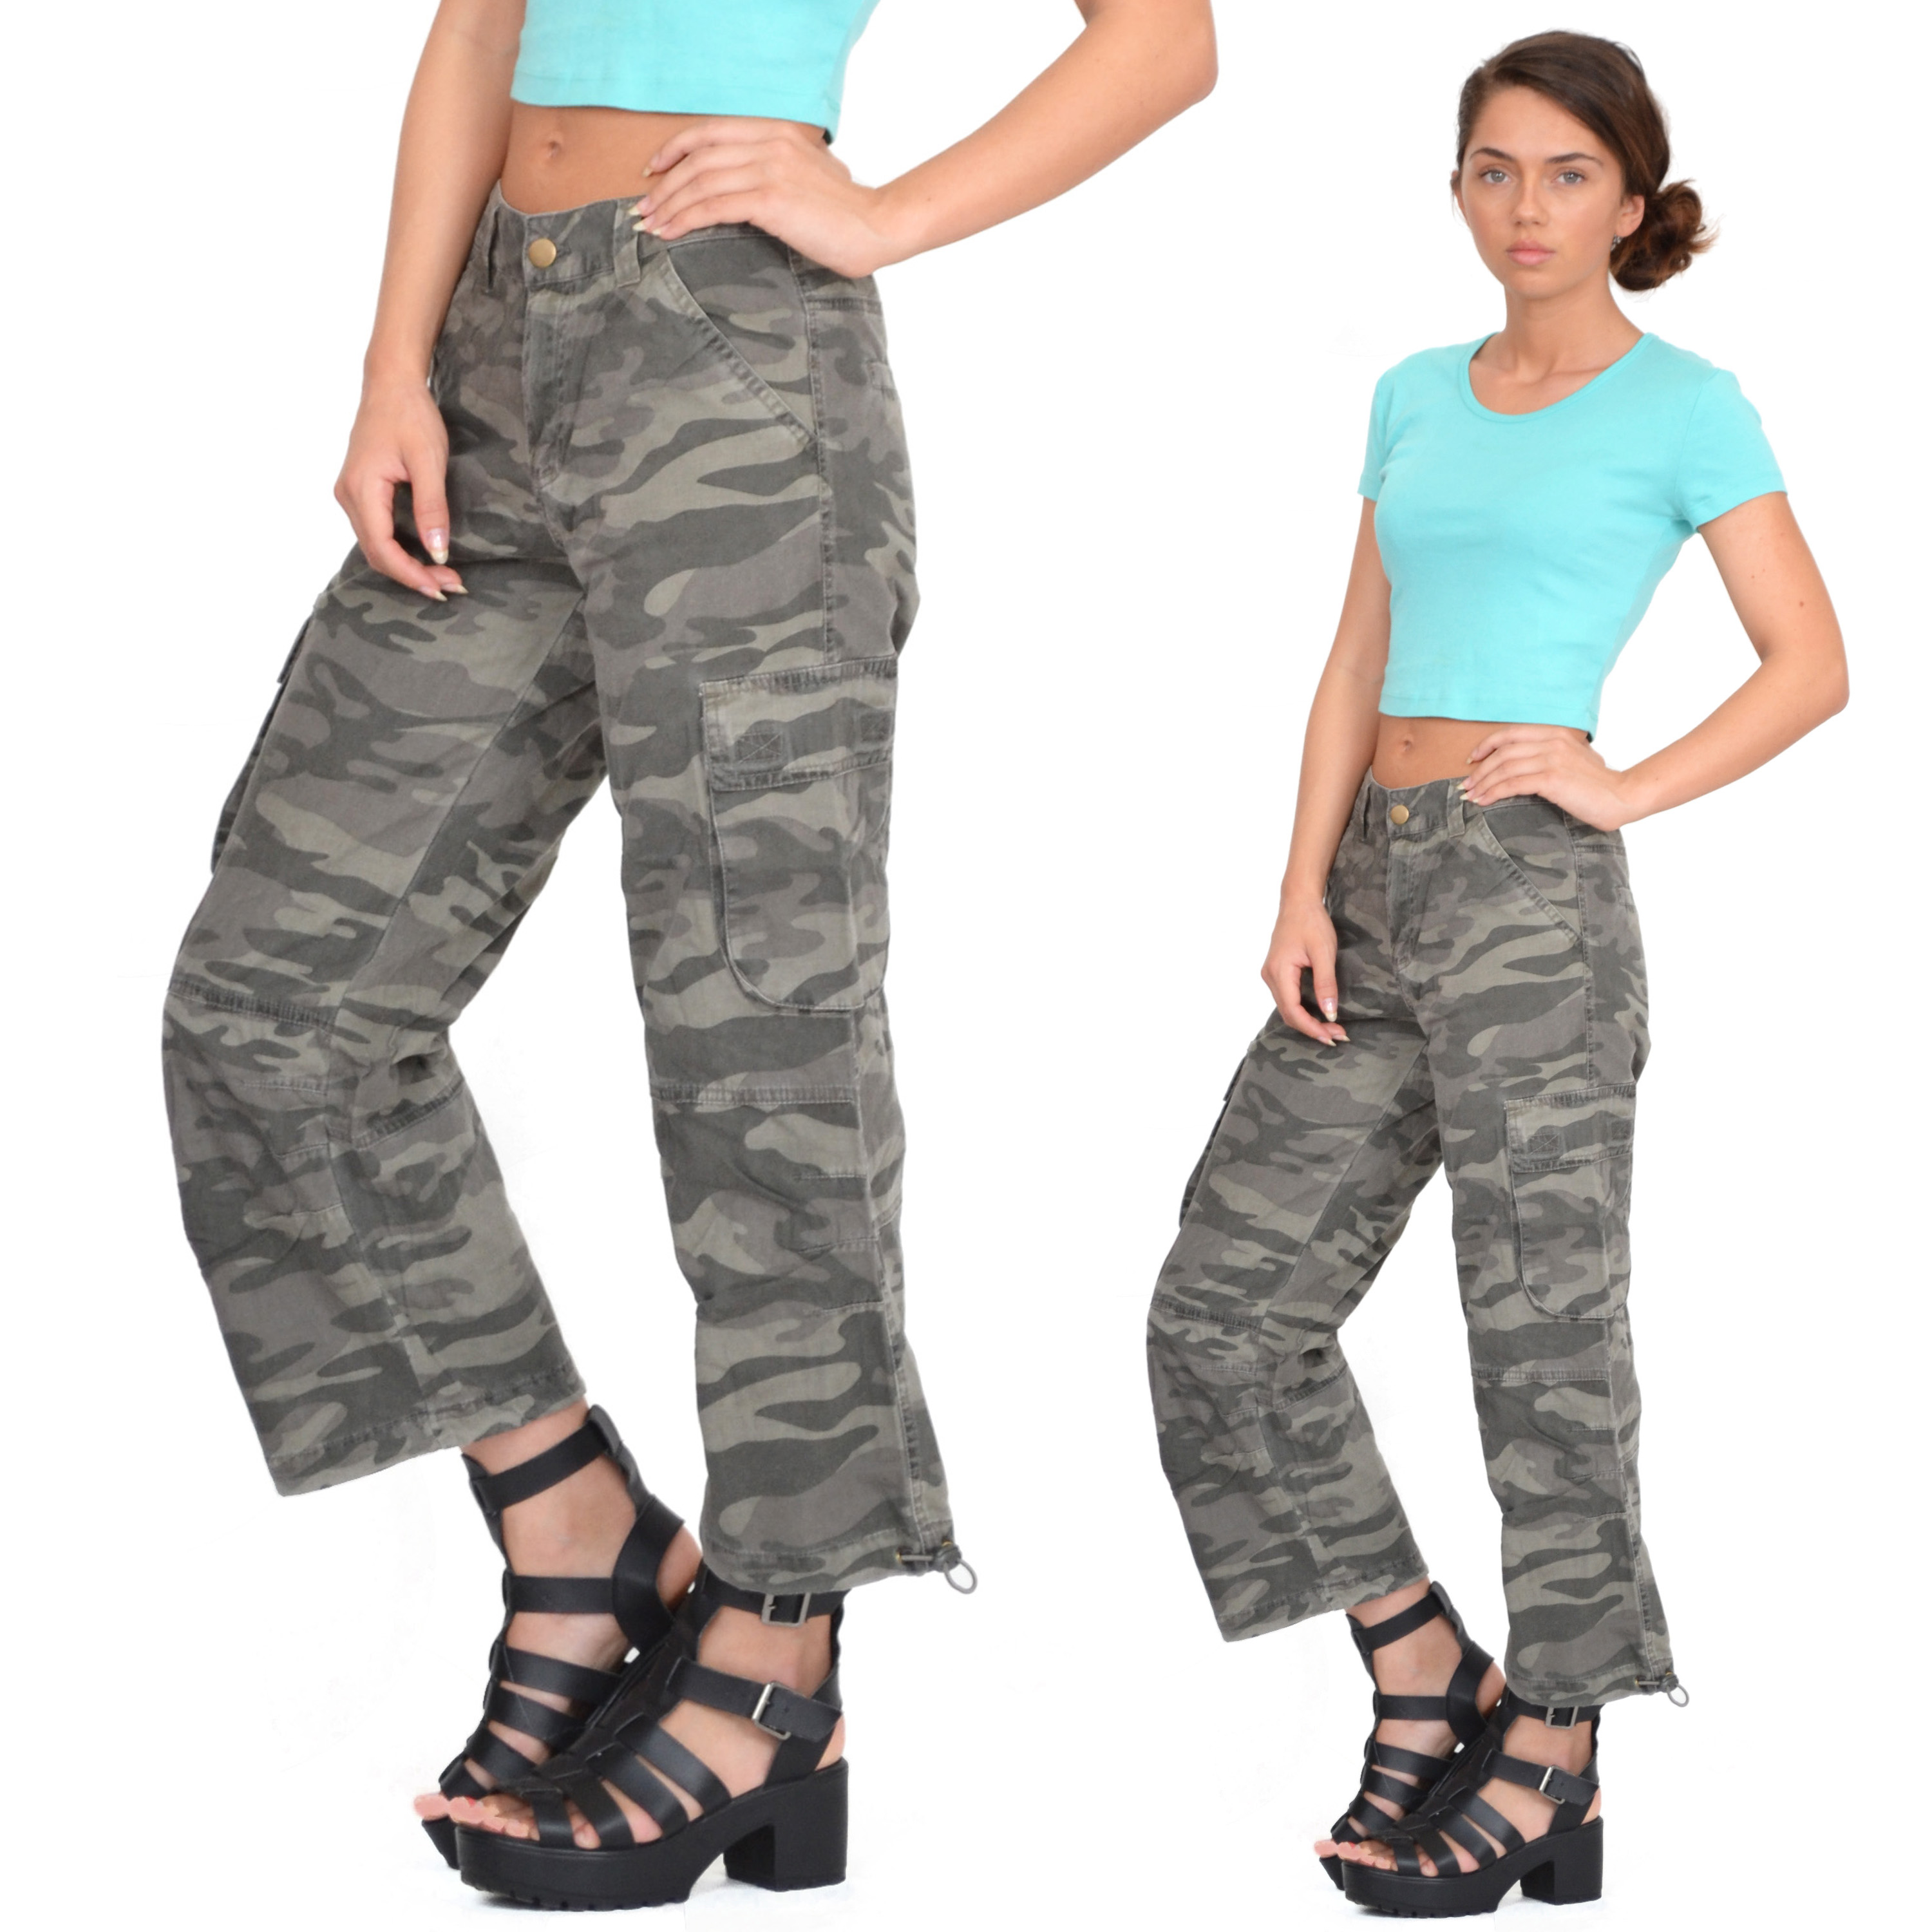 New Womens Army Military Green Camouflage Cargo Combat Shorts 3/4 ...